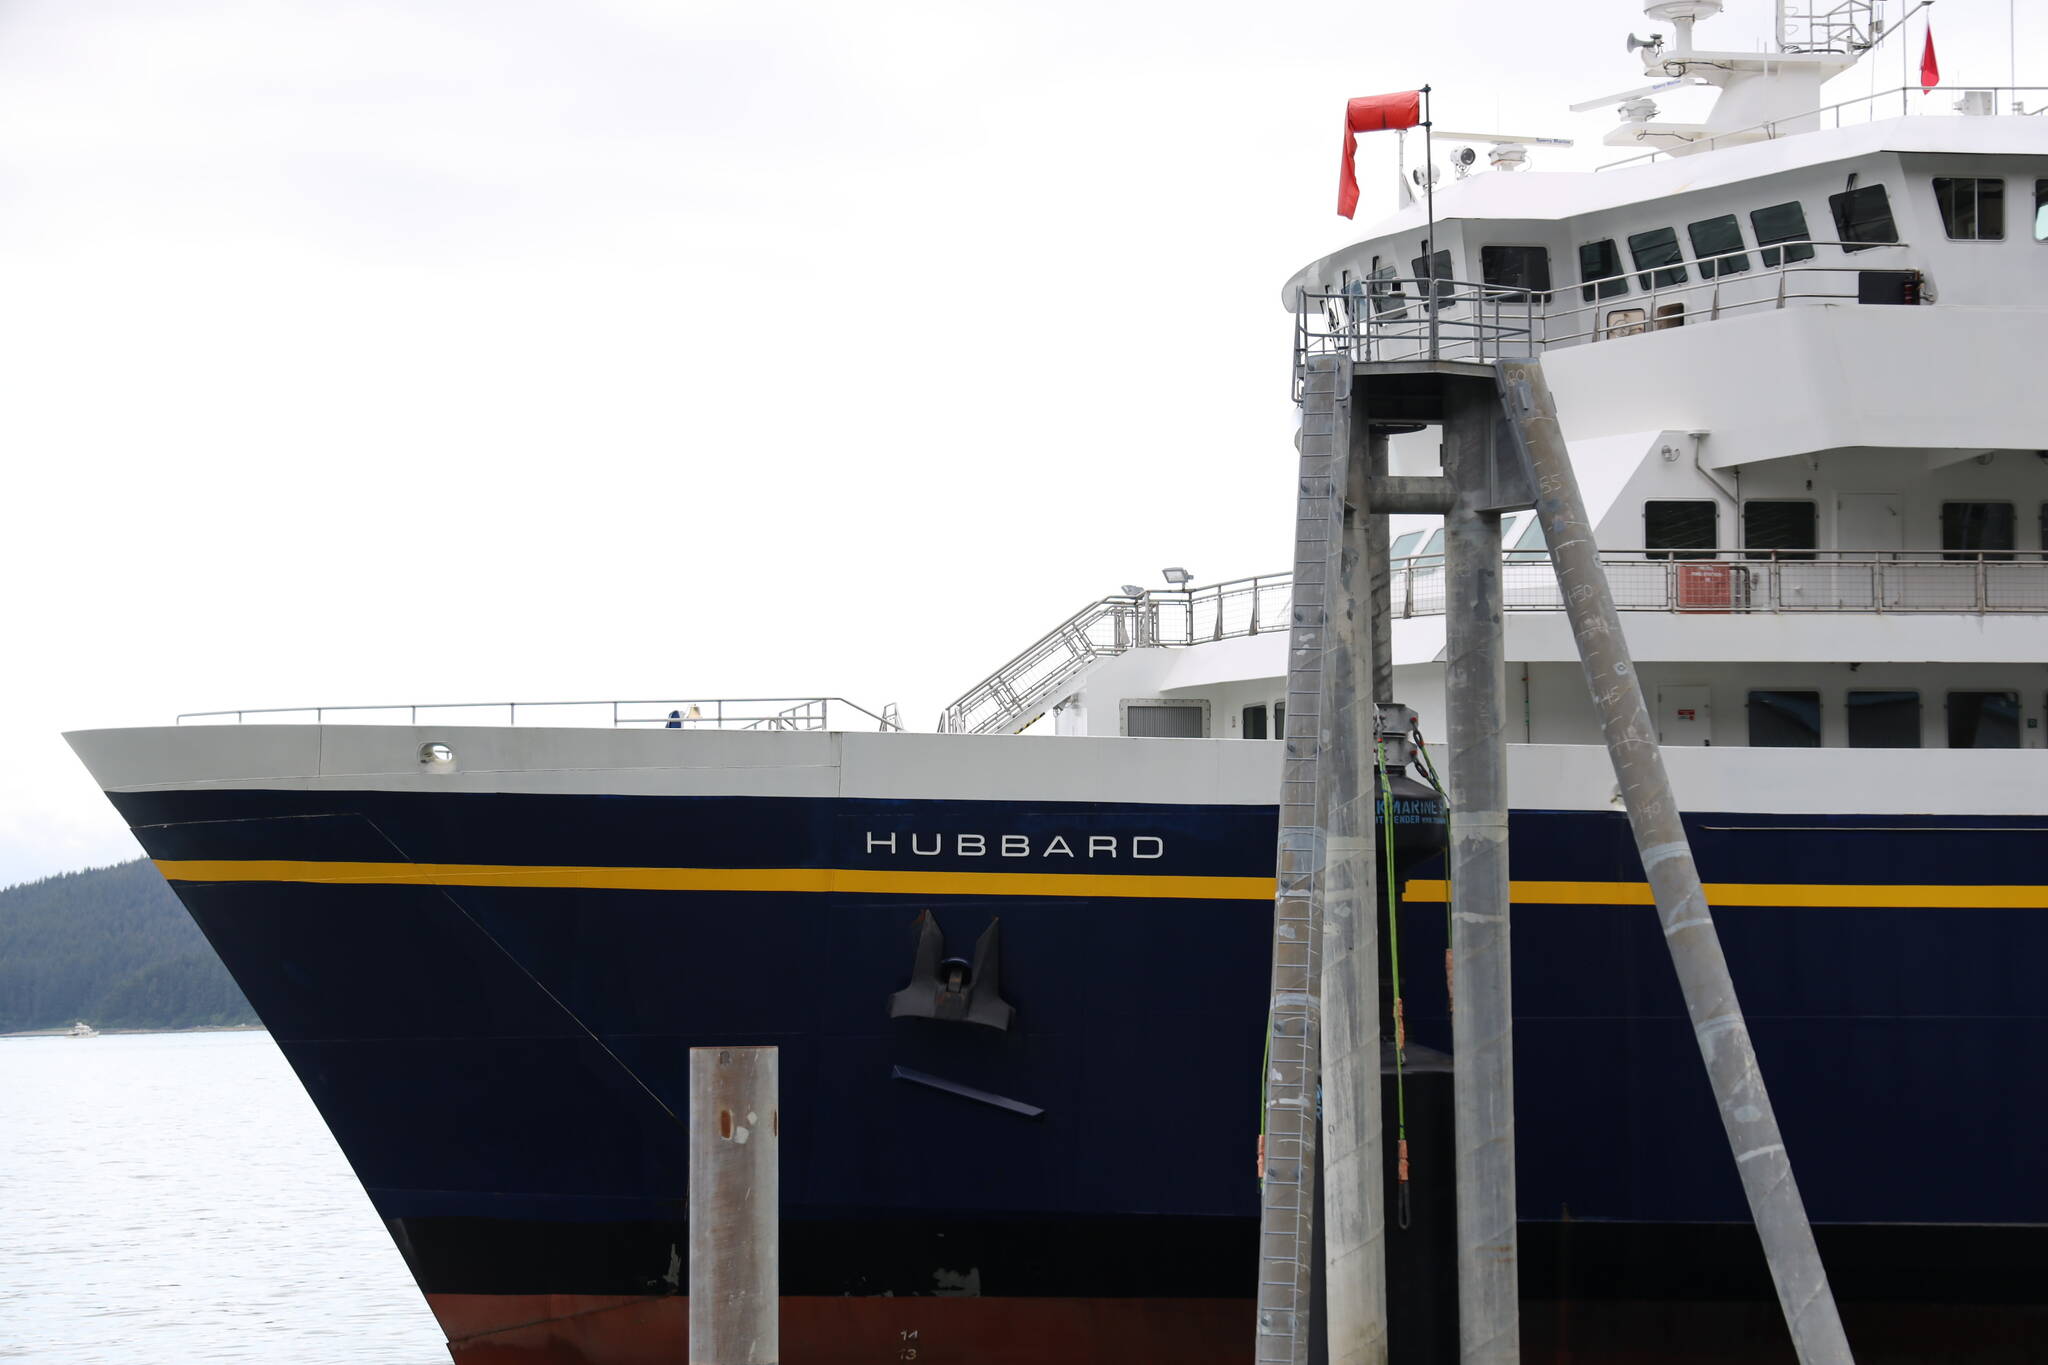 The Hubbard state ferry remains in dock at the Auke Bay Ferry Terminal on Friday after suffering generator problems that are expected to keep the ship out of service until Monday. (Clarise Larson / Juneau Empire)